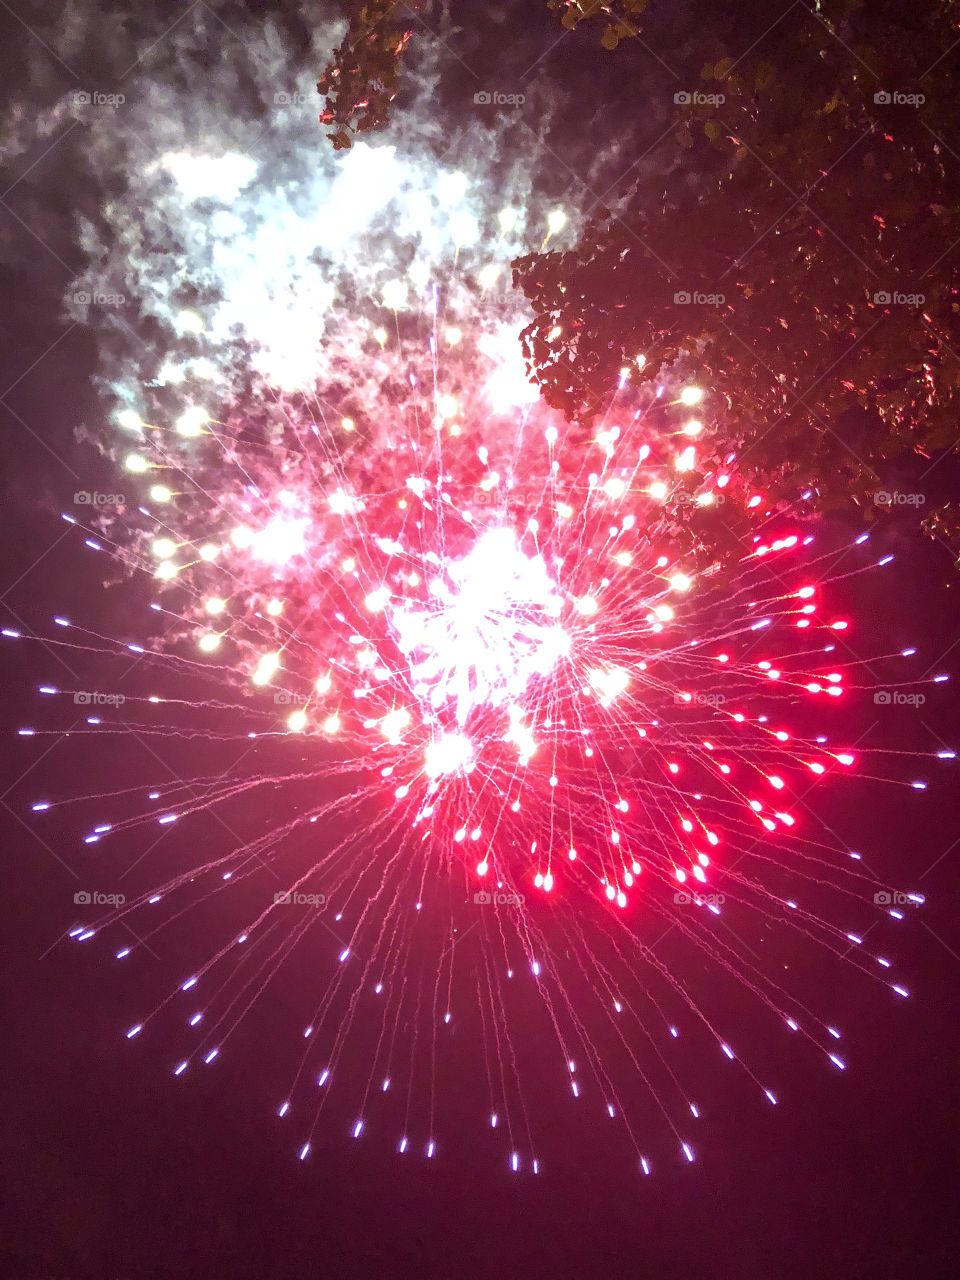 Fireworks show on a summer night